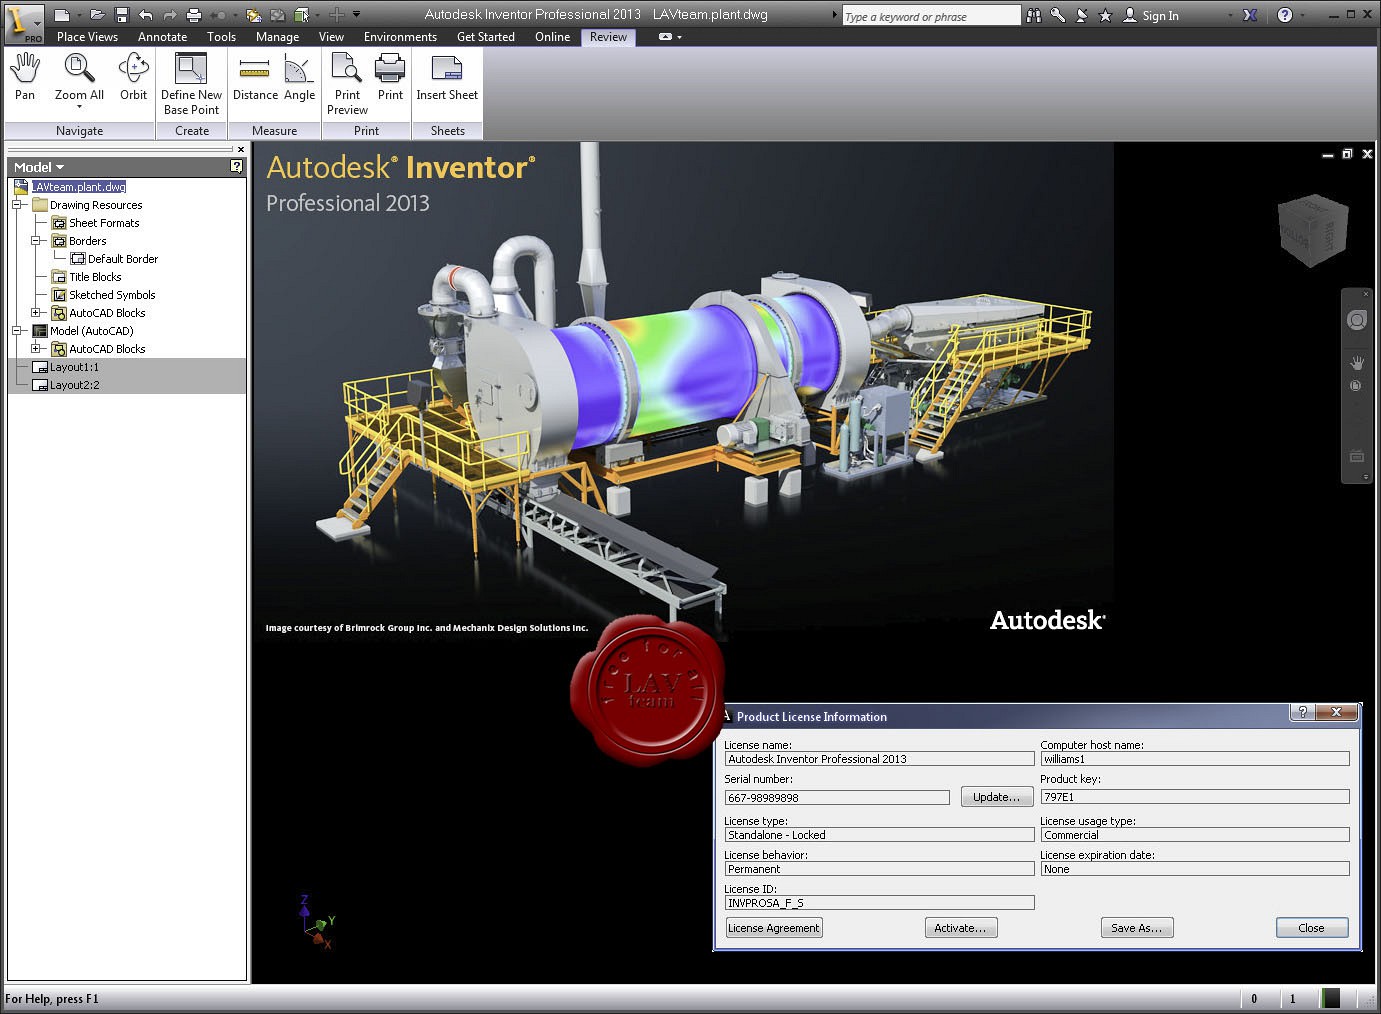 Autodesk Inventor Professional 2013 Service Pack 2